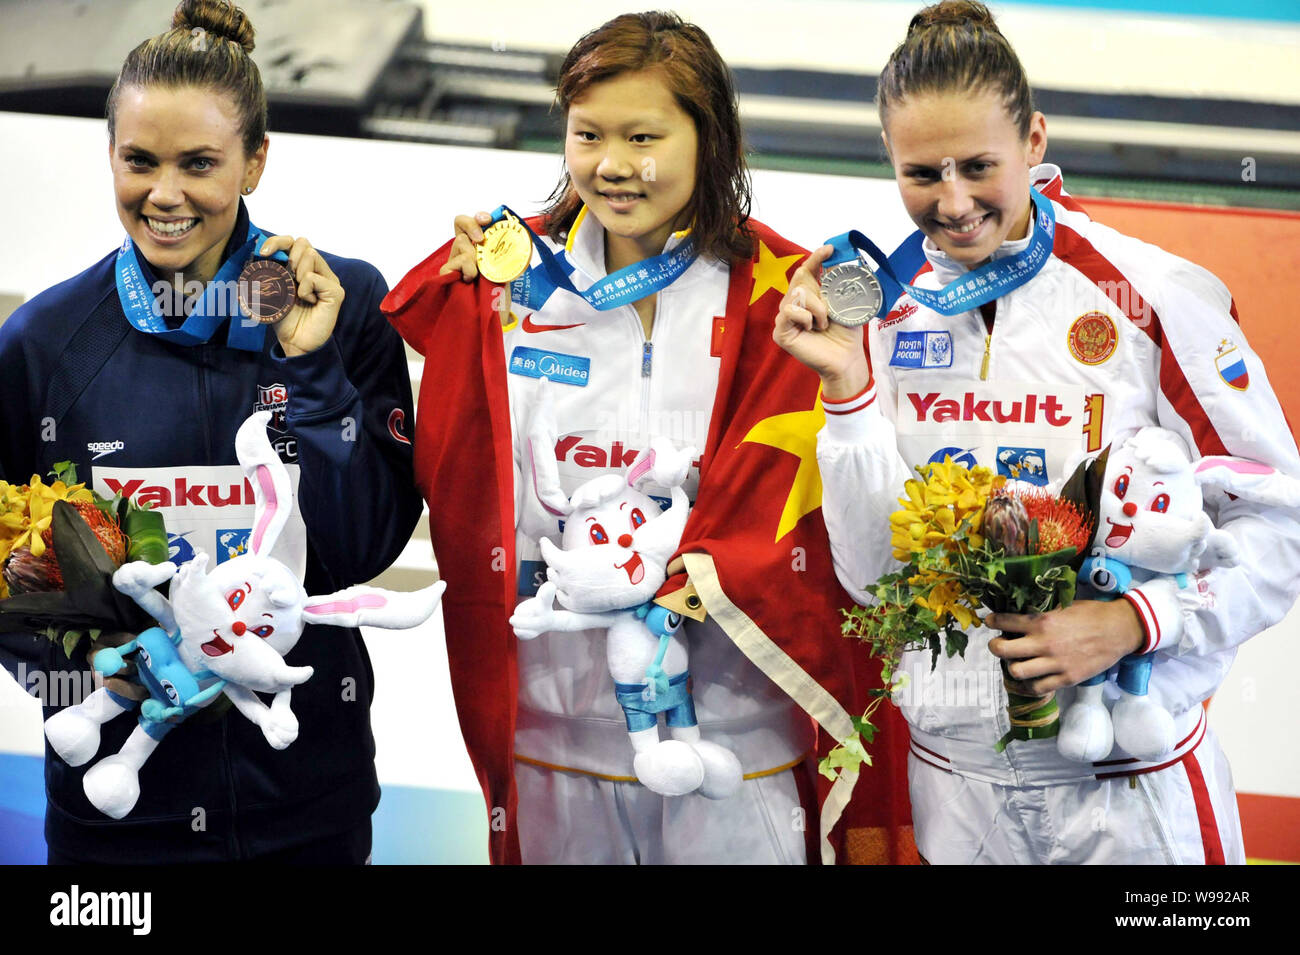 (From left) Bronze medalist Natalie Coughlin of the United States, gold medalist Zhao Jing of China and silver medalist Anastasia Zueva of Russia show Stock Photo